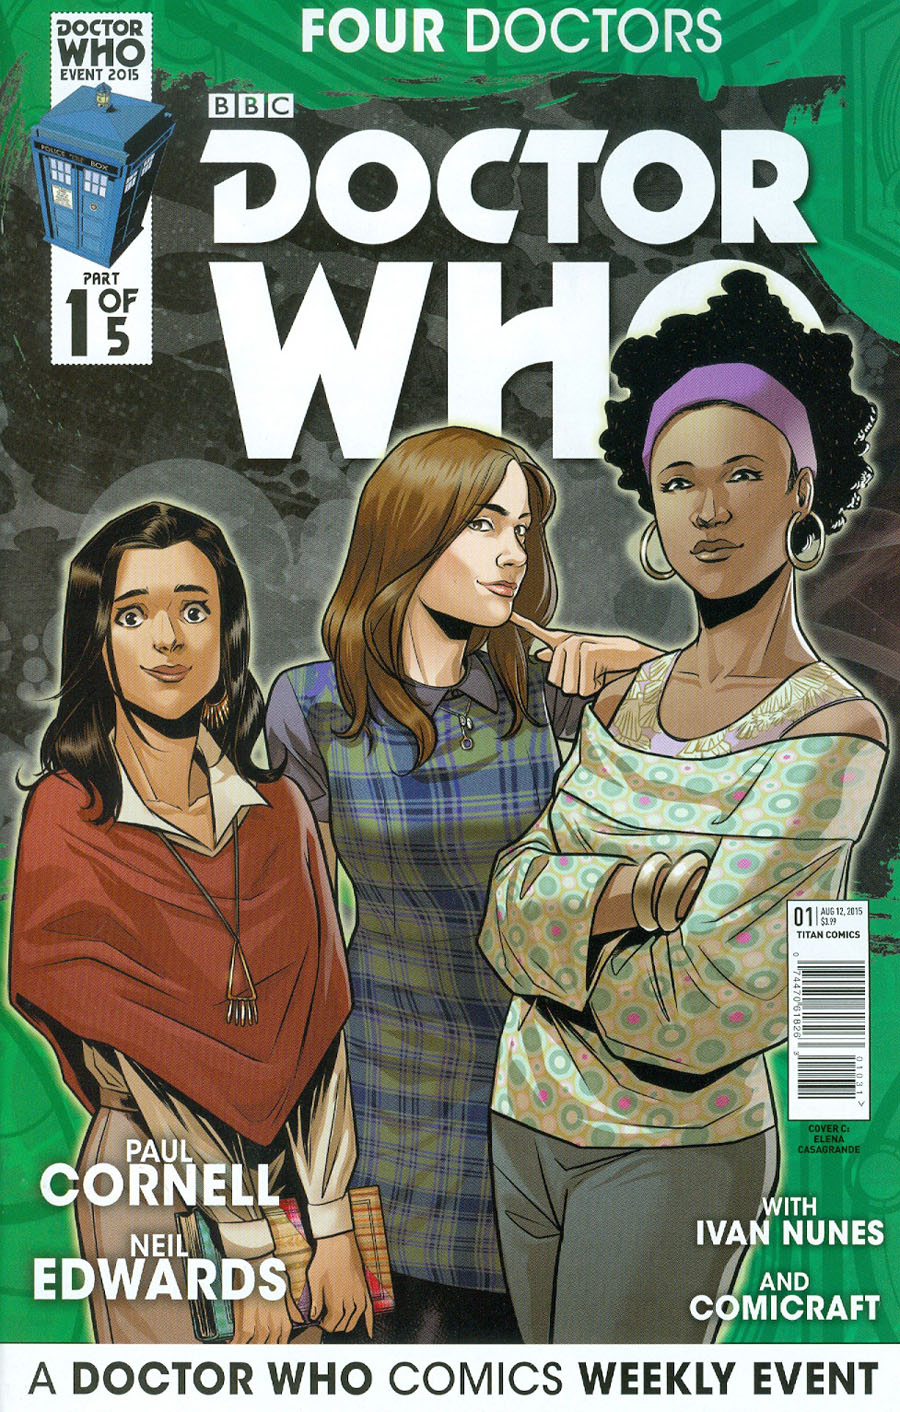 Doctor Who Event 2015 Four Doctors #1 Cover C Incentive Elena Casagrande Interlinking Companion Variant Cover